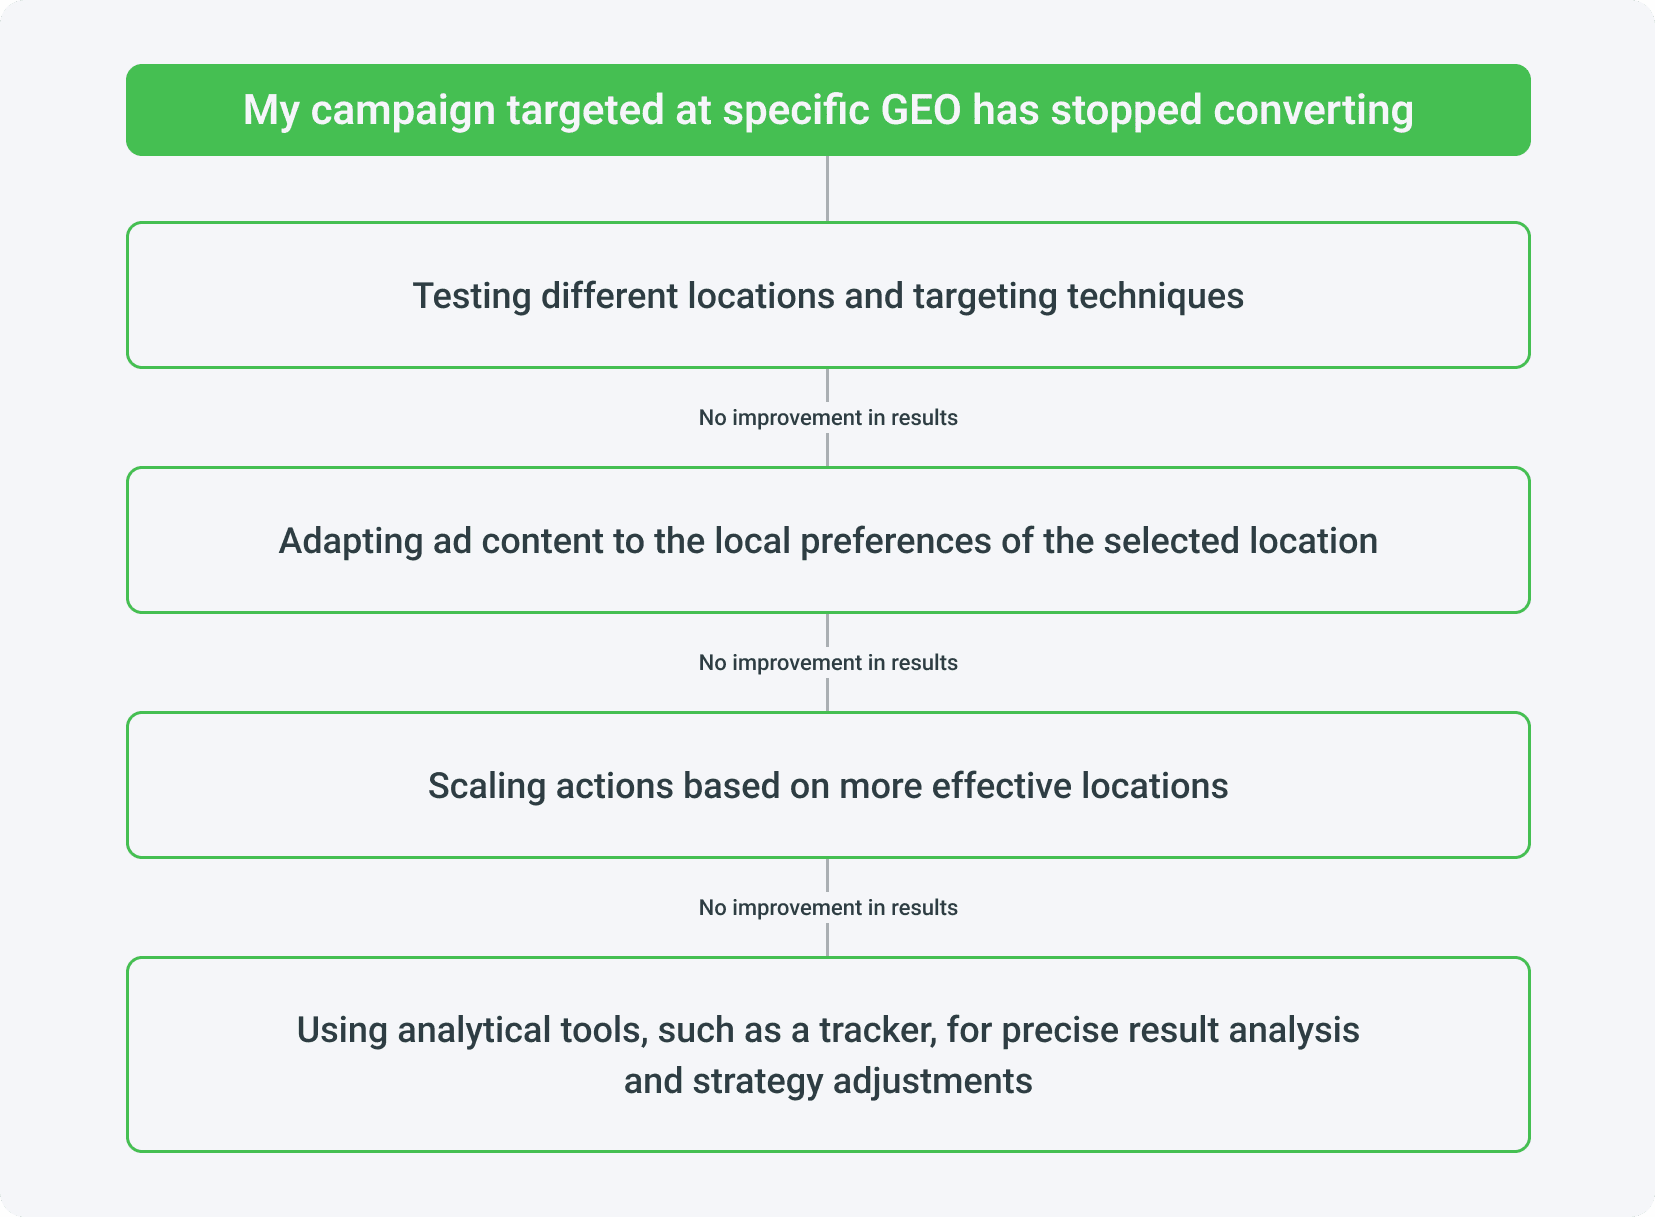 What to do when a campaign targeting a specific GEO has stopped converting?